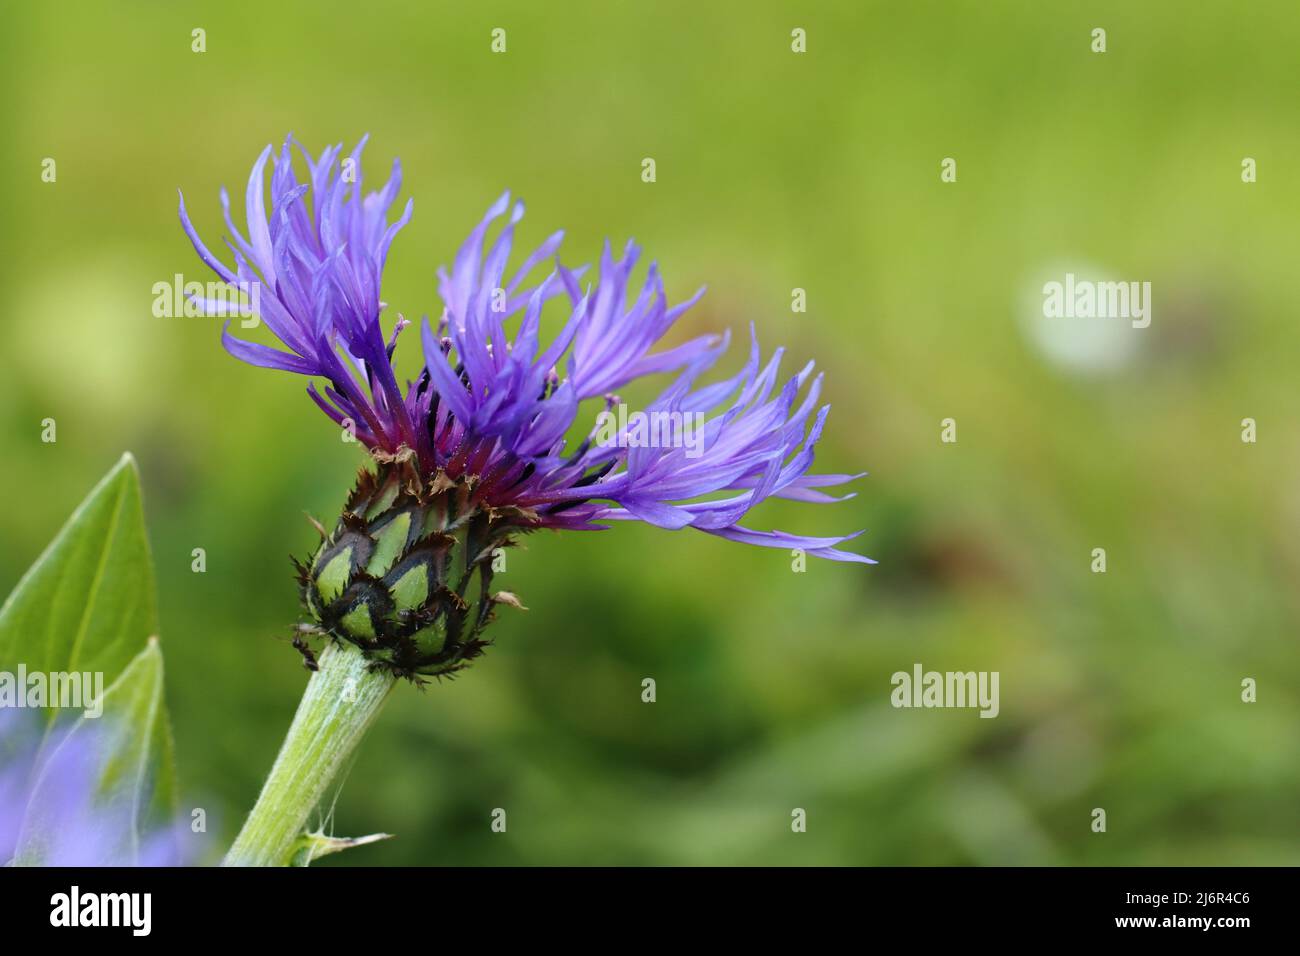 close-up of a single beautiful blue centaurea montana against a green blurred background, copy space Stock Photo